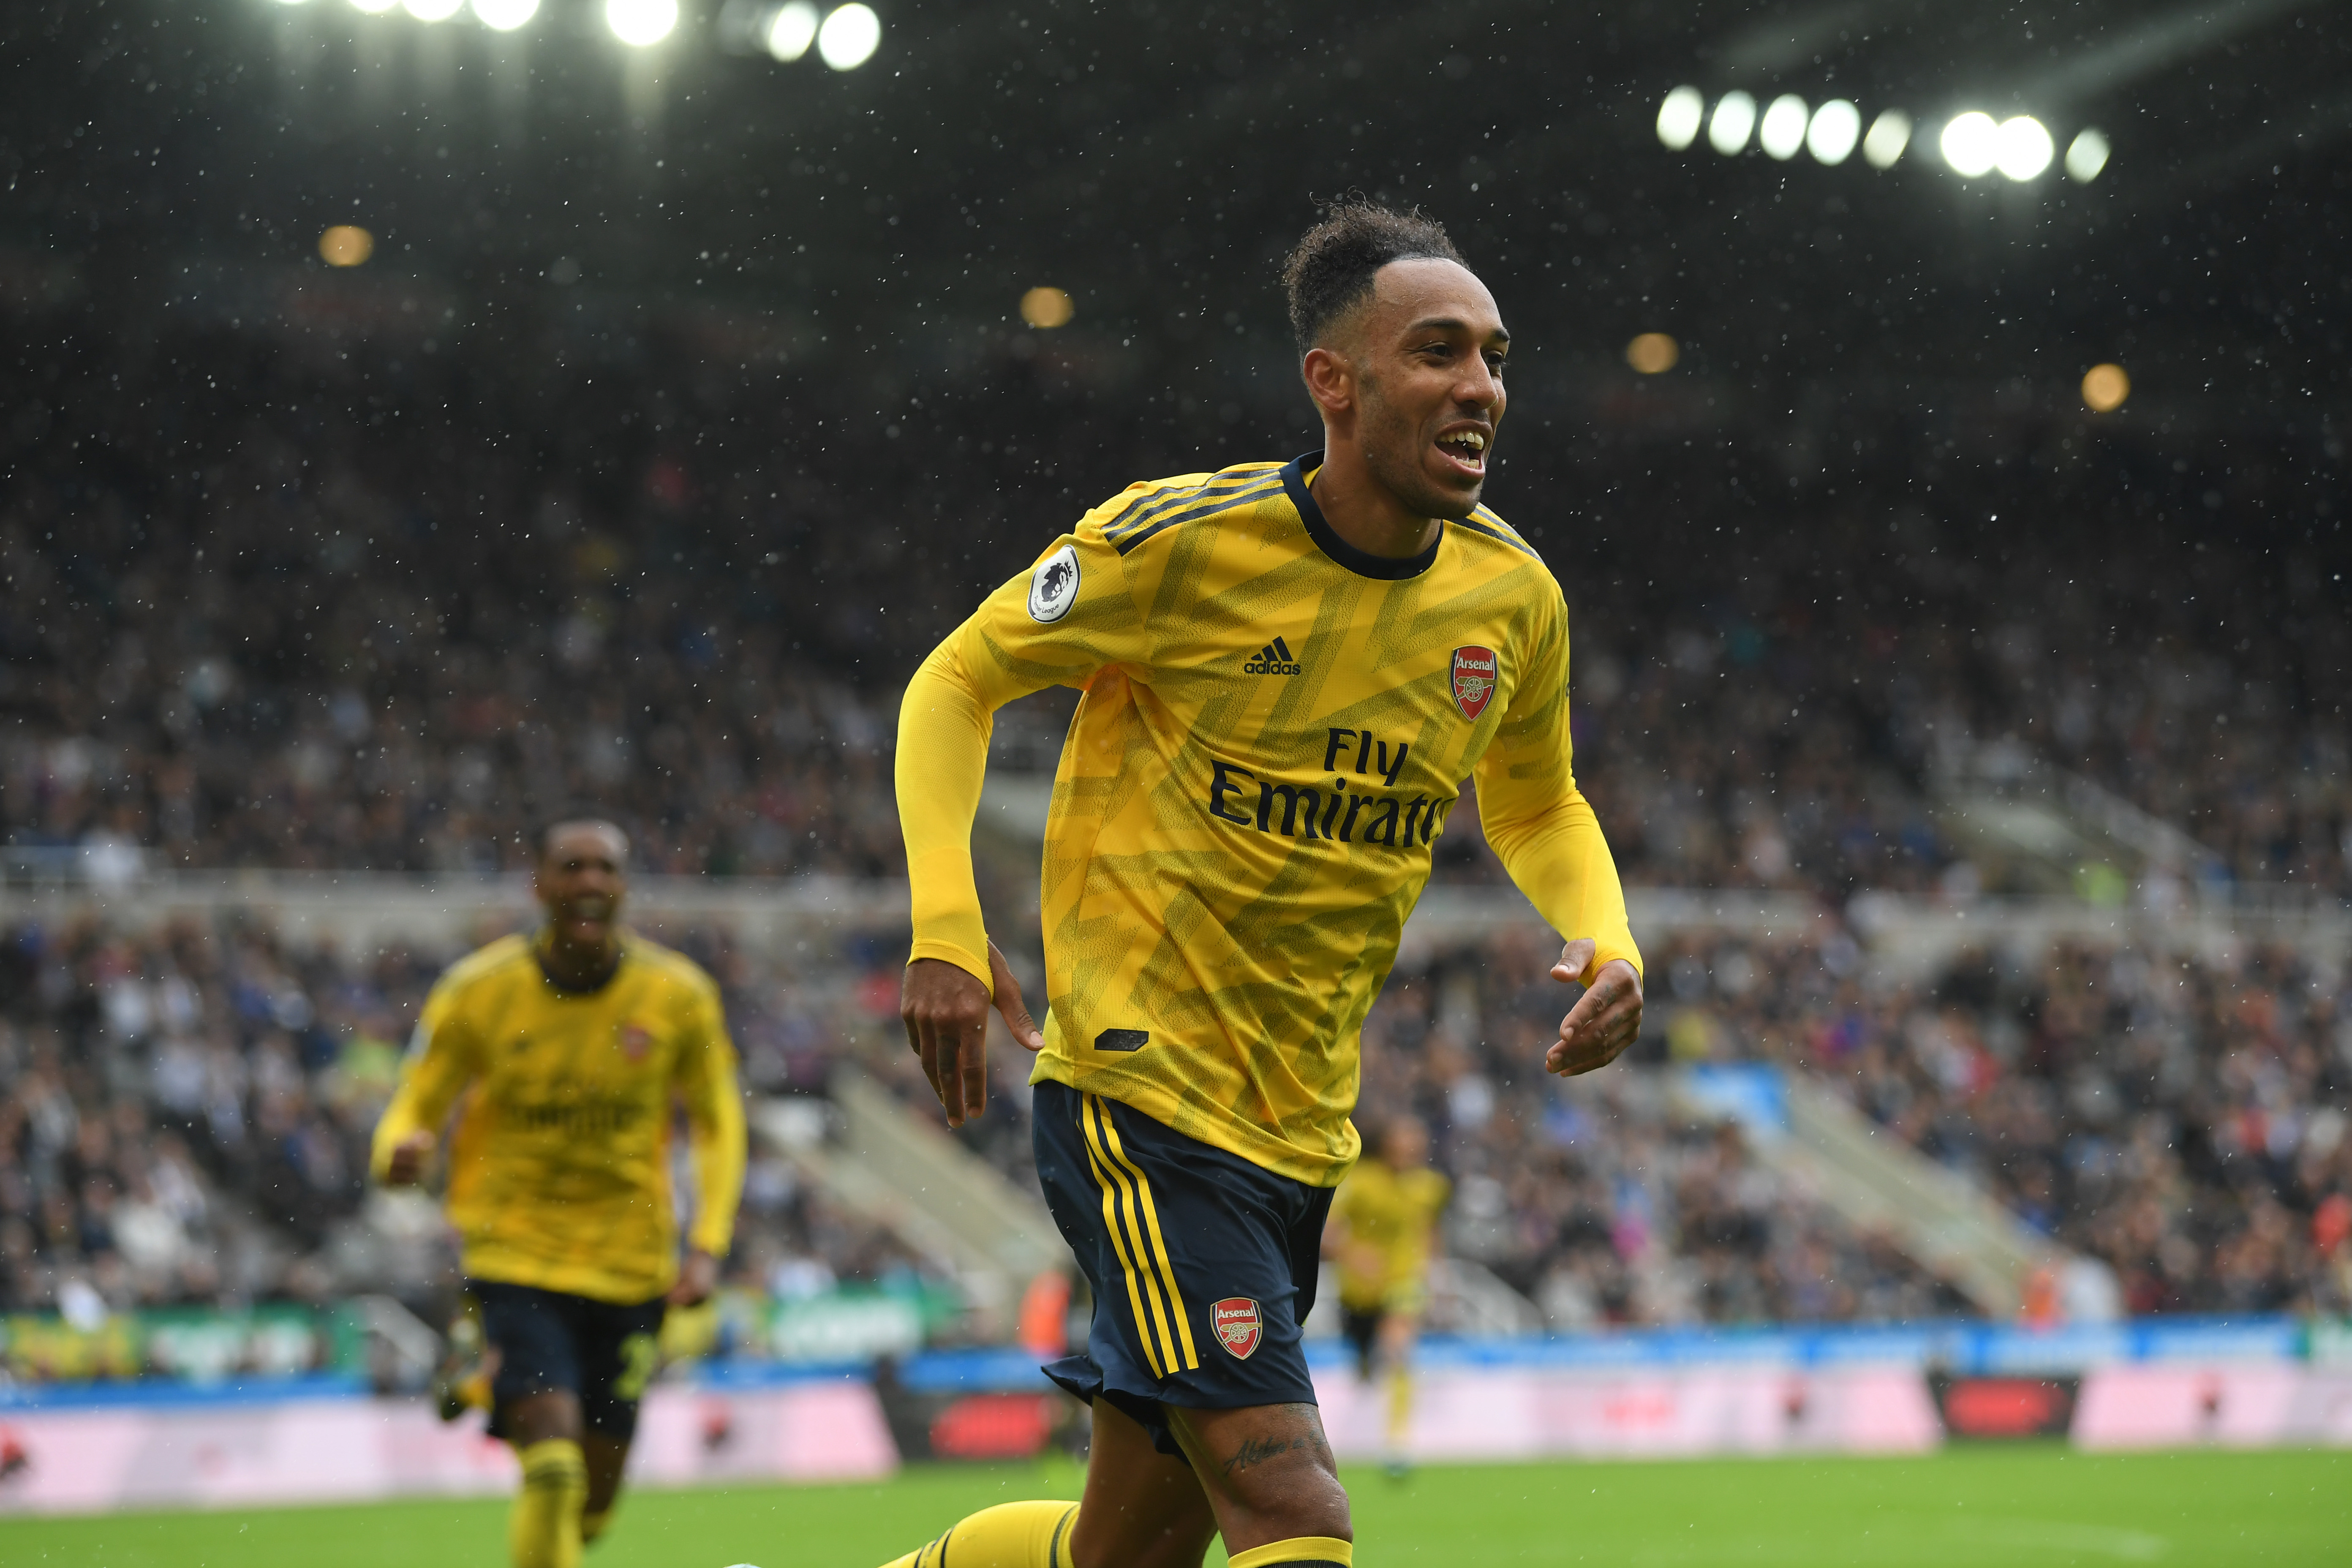 NEWCASTLE UPON TYNE, ENGLAND - AUGUST 11: Arsenal player Pierre-Emerick Aubameyang celebrates after scoring the winning goal  during the Premier League match between Newcastle United and Arsenal FC at St. James Park on August 11, 2019 in Newcastle upon Tyne, United Kingdom. (Photo by Stu Forster/Getty Images)